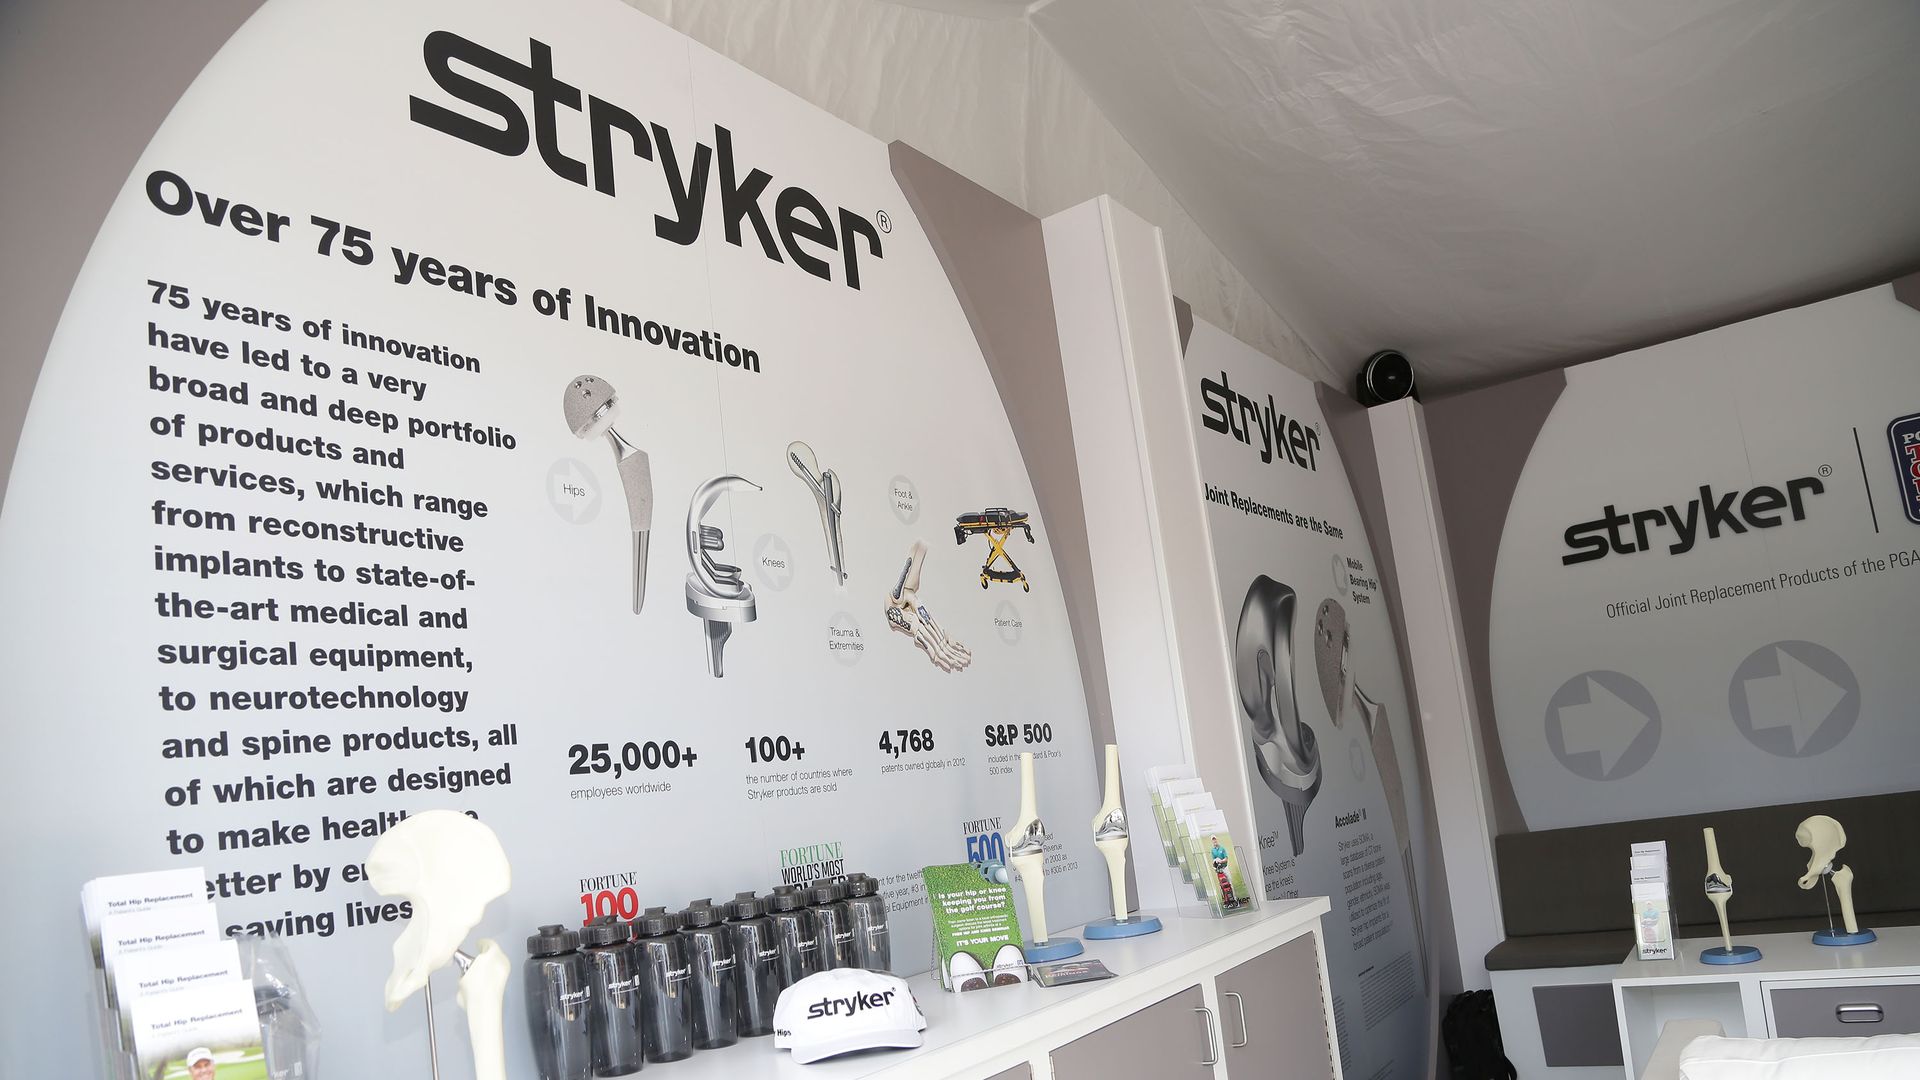 A Stryker exhibit of joint replacement implants.